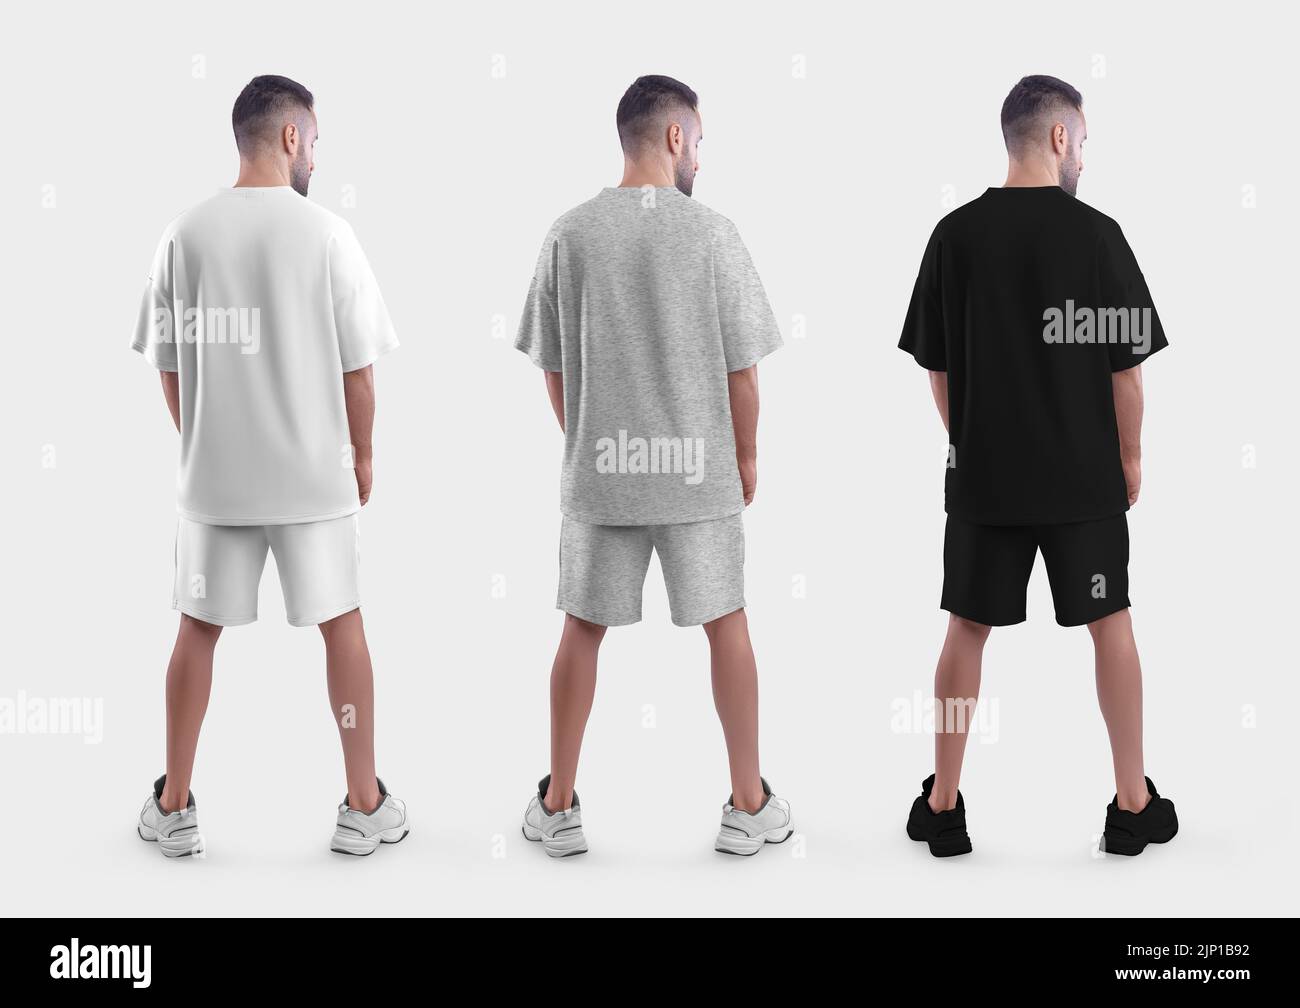 Oversized suit mockup, white, black, heather t-shirt, shorts on a guy in sneakers, back view, isolated on background. Male clothing template with plac Stock Photo